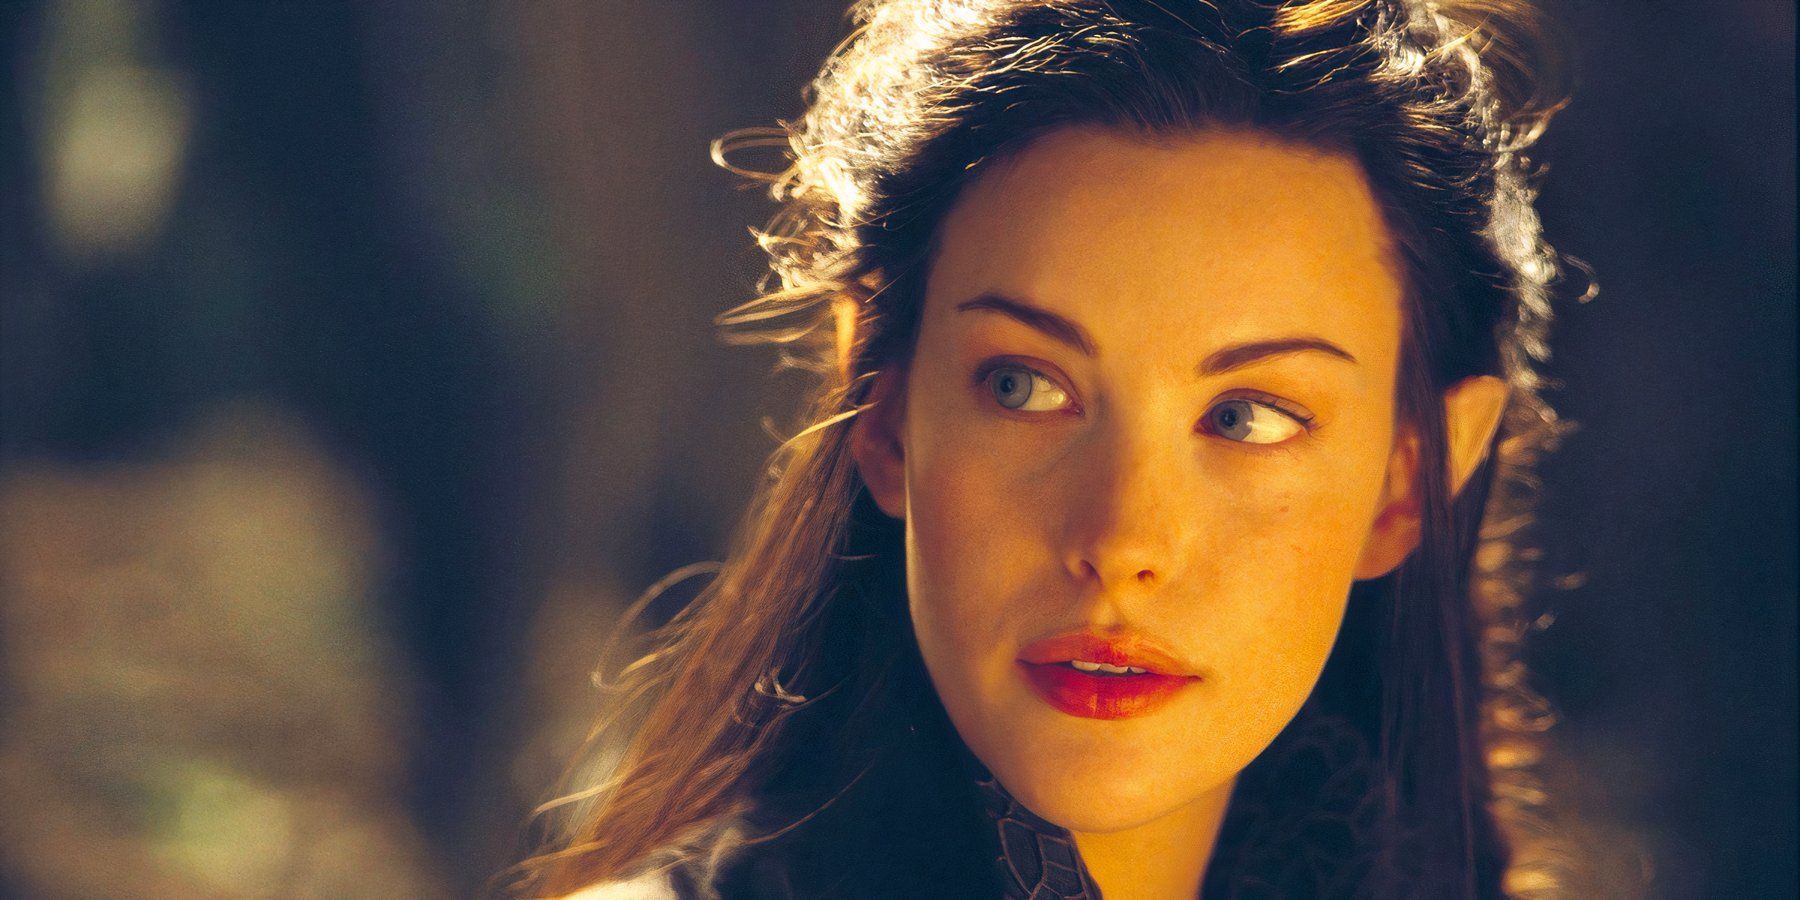 The elf maiden Arwen, played by actor Liv Tyler, looks pensive in The Lord of the Rings: The Fellowship of the Ring.